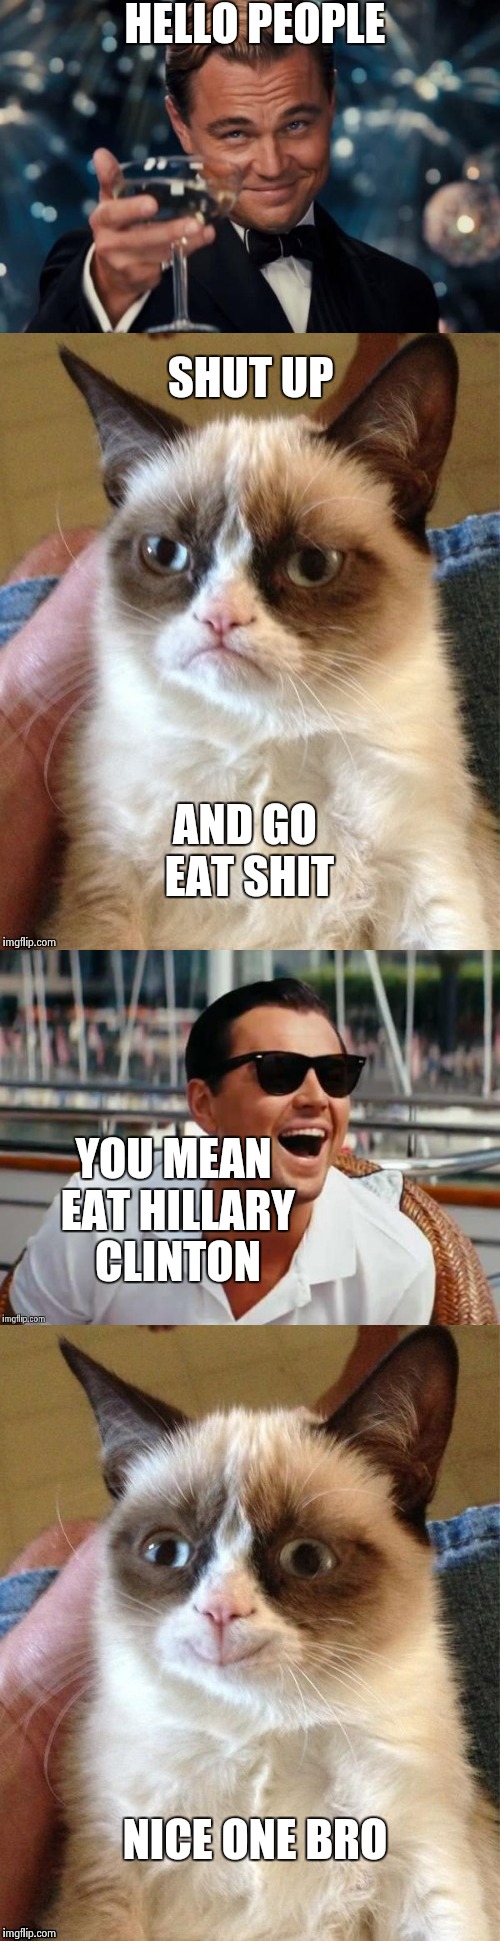 Leonardo and grumpy cat insult | HELLO PEOPLE; SHUT UP; AND GO EAT SHIT; YOU MEAN EAT HILLARY CLINTON; NICE ONE BRO | image tagged in grumpy cat,leonardo dicaprio cheers,hillary clinton | made w/ Imgflip meme maker